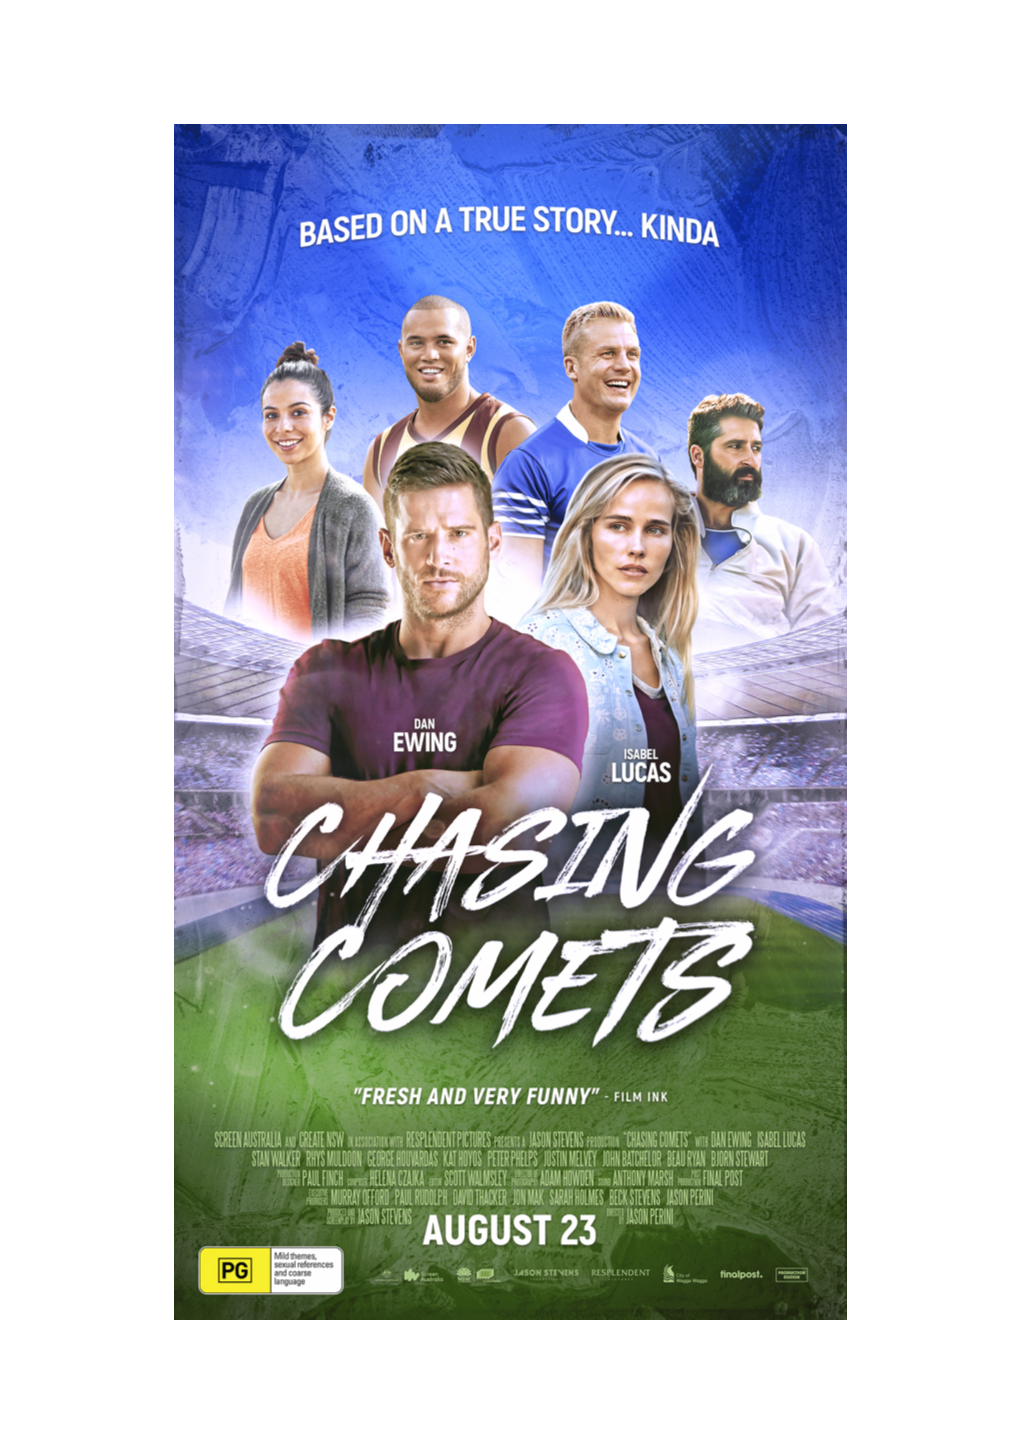 Chasing Comets Press